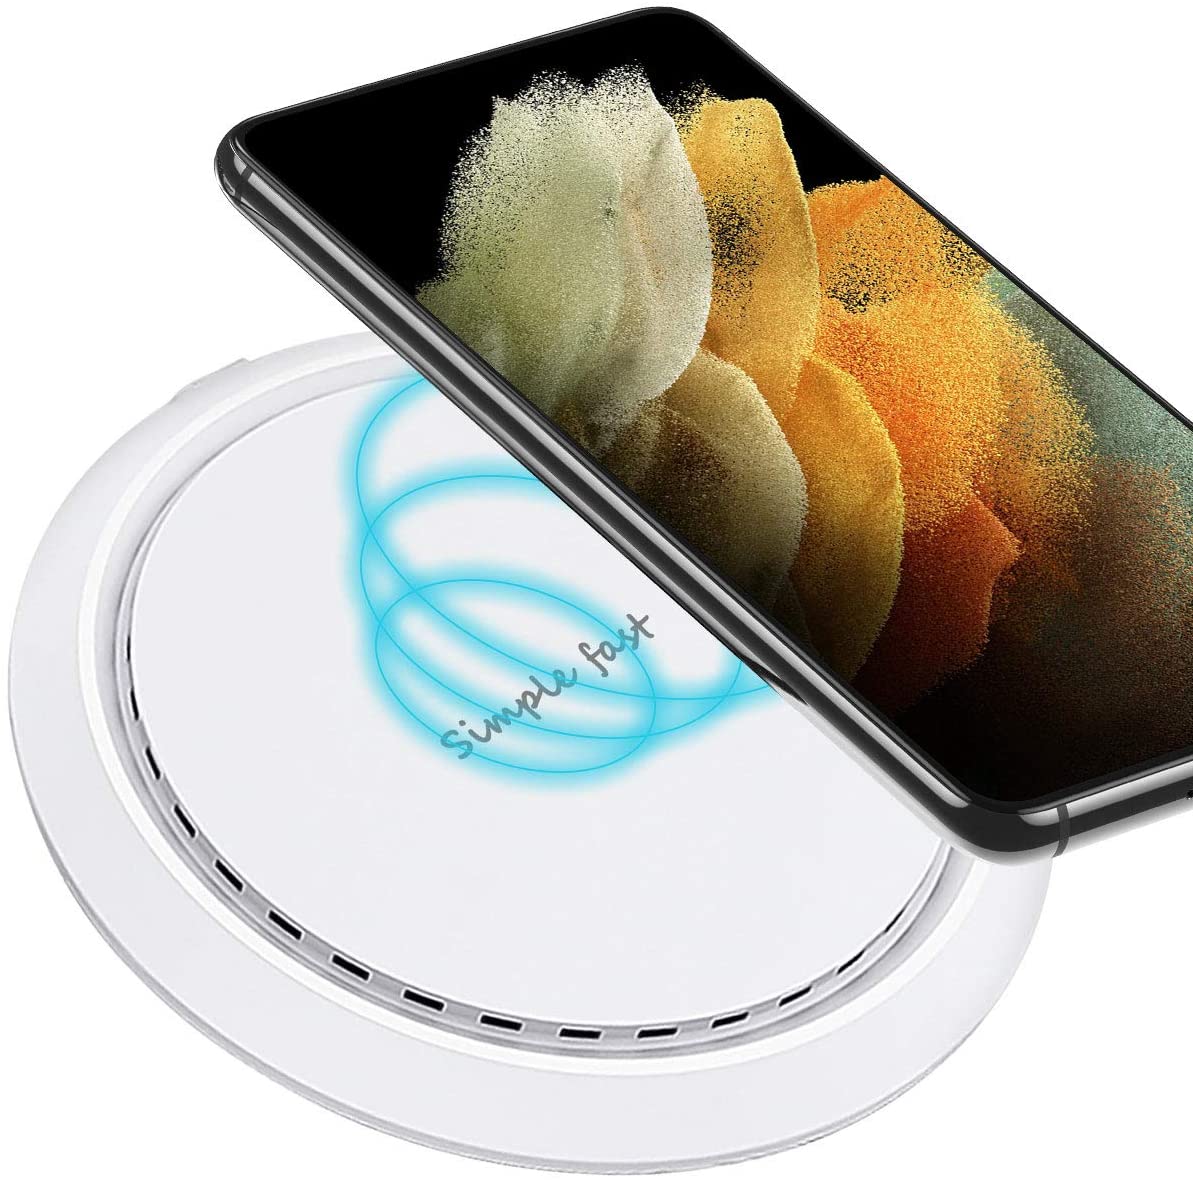 ULTRICS Wireless Charging Pad, Ultra Slim 10W Fast Wireless Charger Compatible with iPhone 12 Pro Max/12 Mini/SE 2020/11/11 Pro/XS Max/X/8 Plus, Airpods Pro, Galaxy S21 Ultra/S20+/S10e/S9, Note 20/10